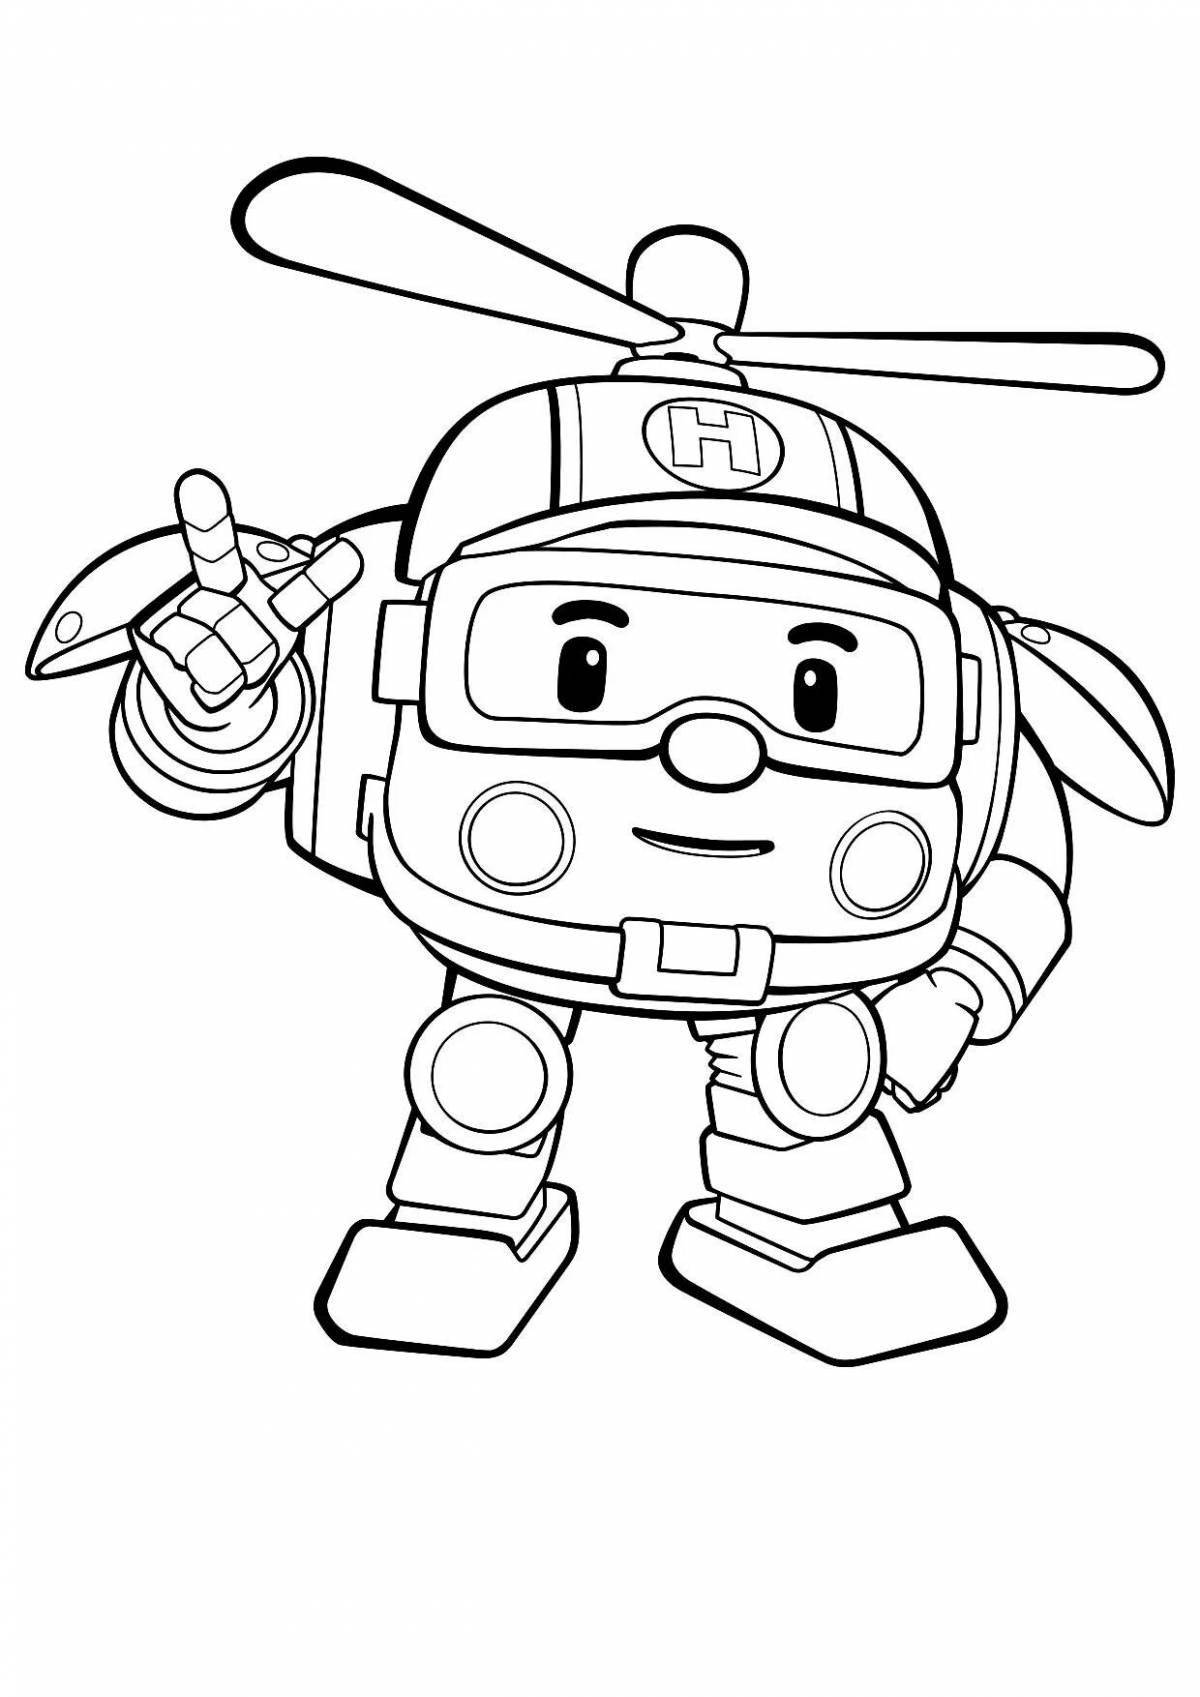 Charming robocar poly video coloring page